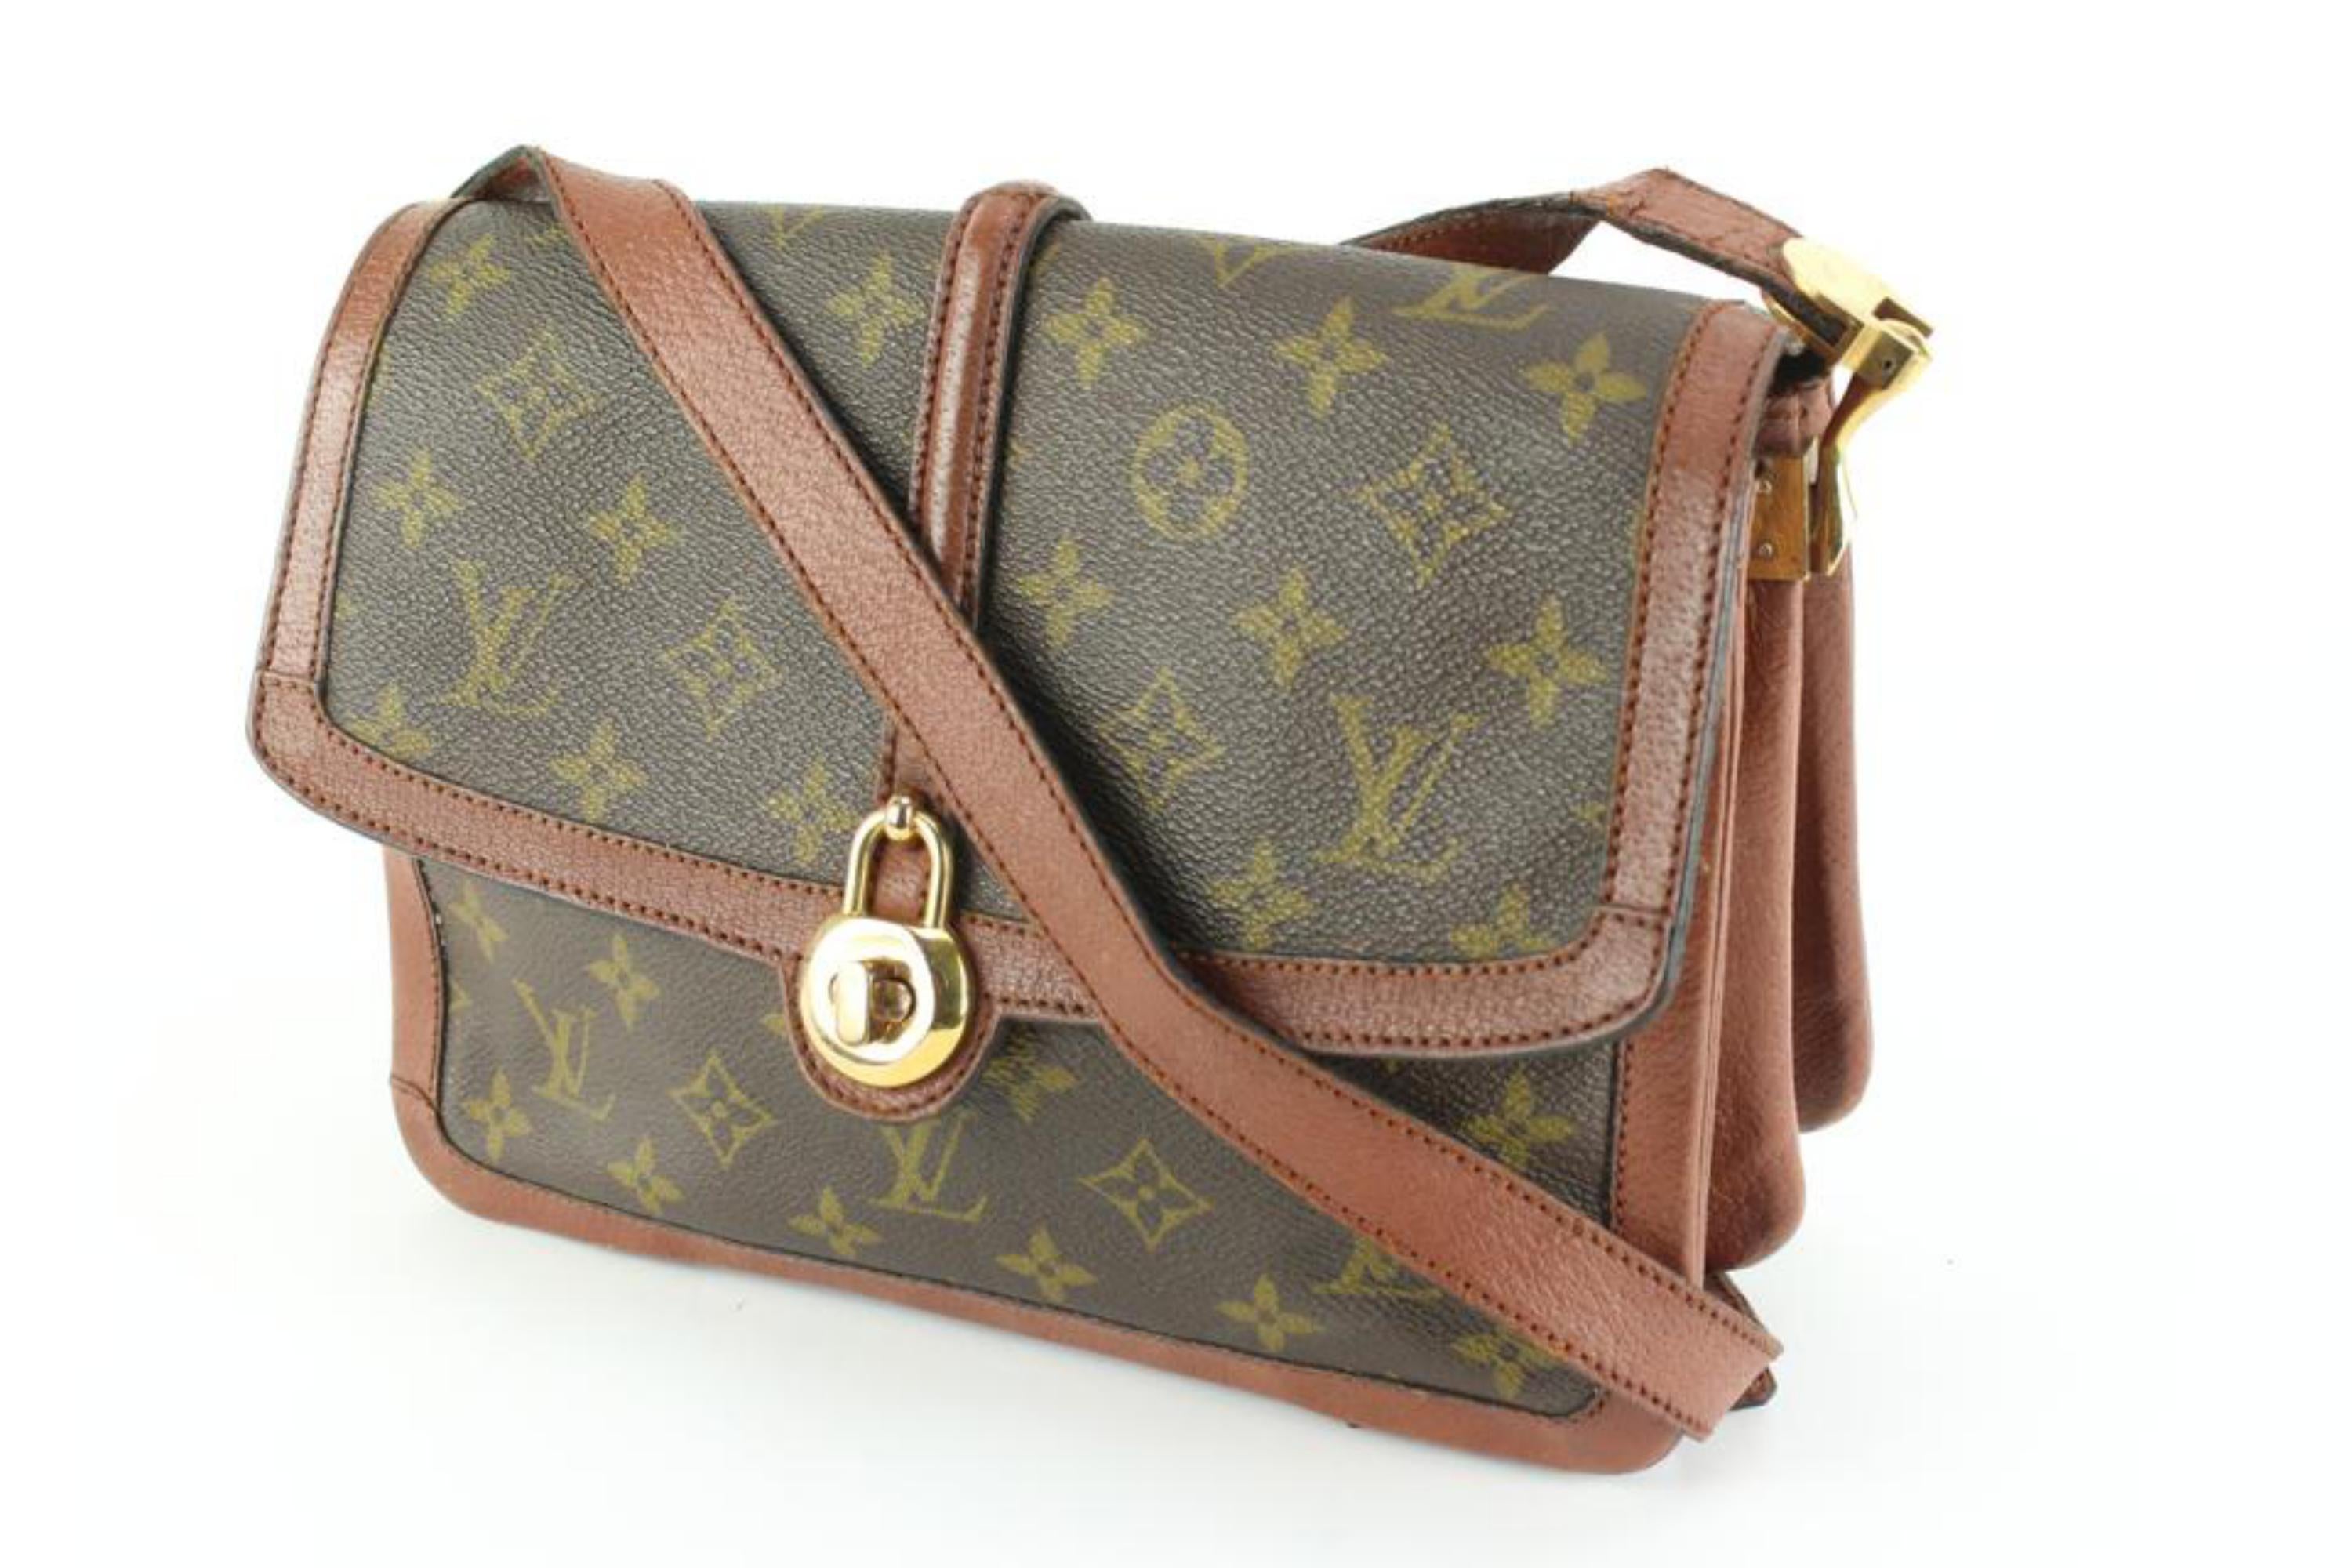 Authentic Discounted Louis Vuitton Sac 197807/158